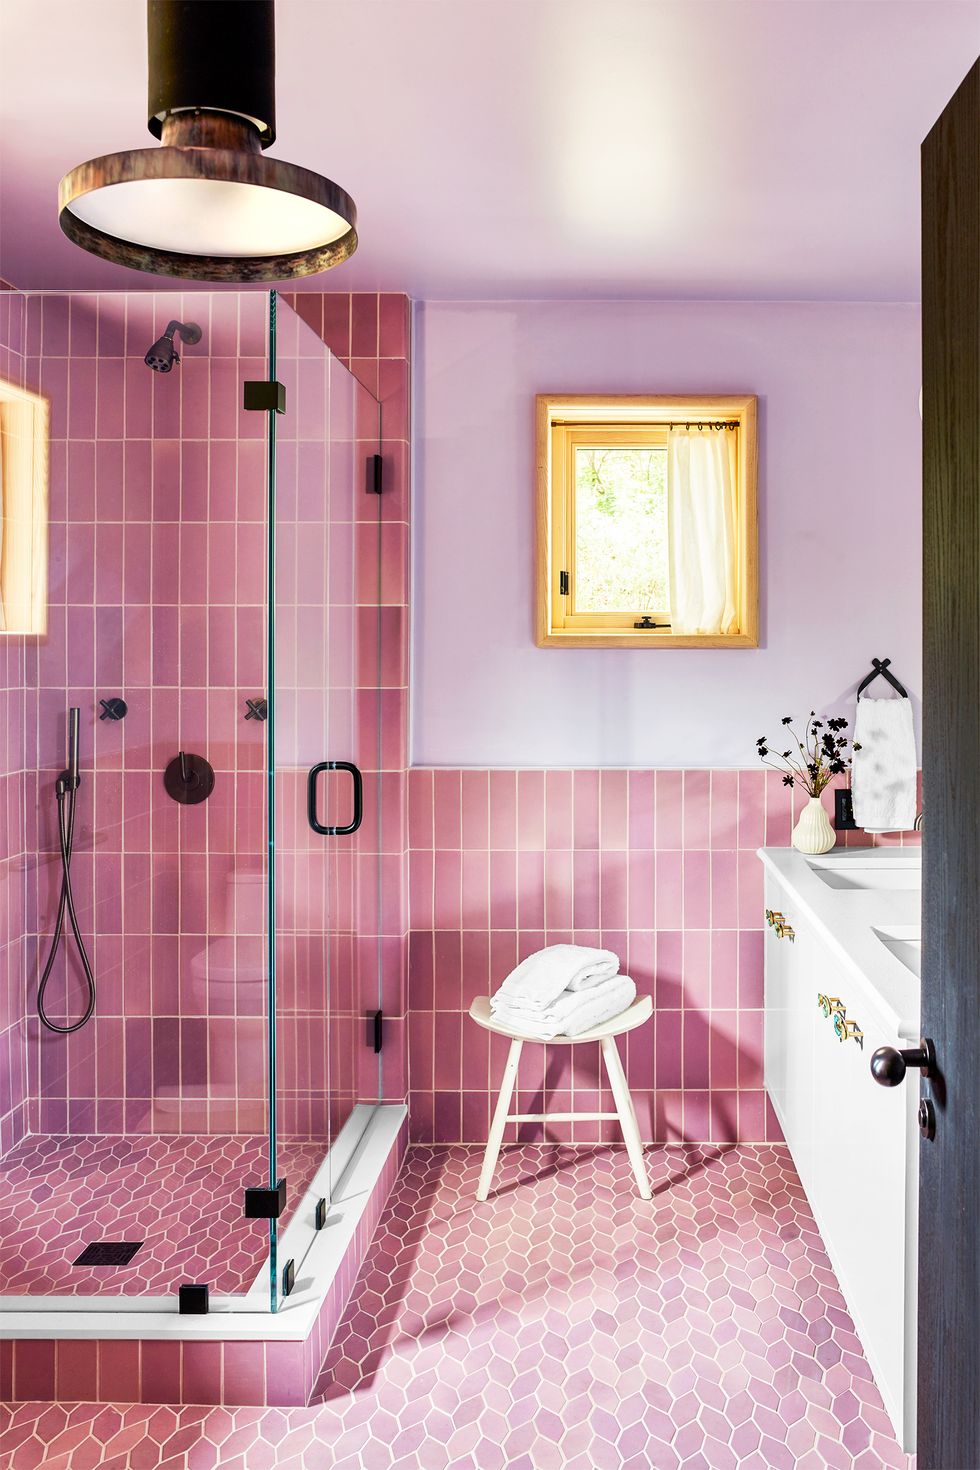 The 60 Coolest Bathroom Tile Ideas To Recreate In Your Home